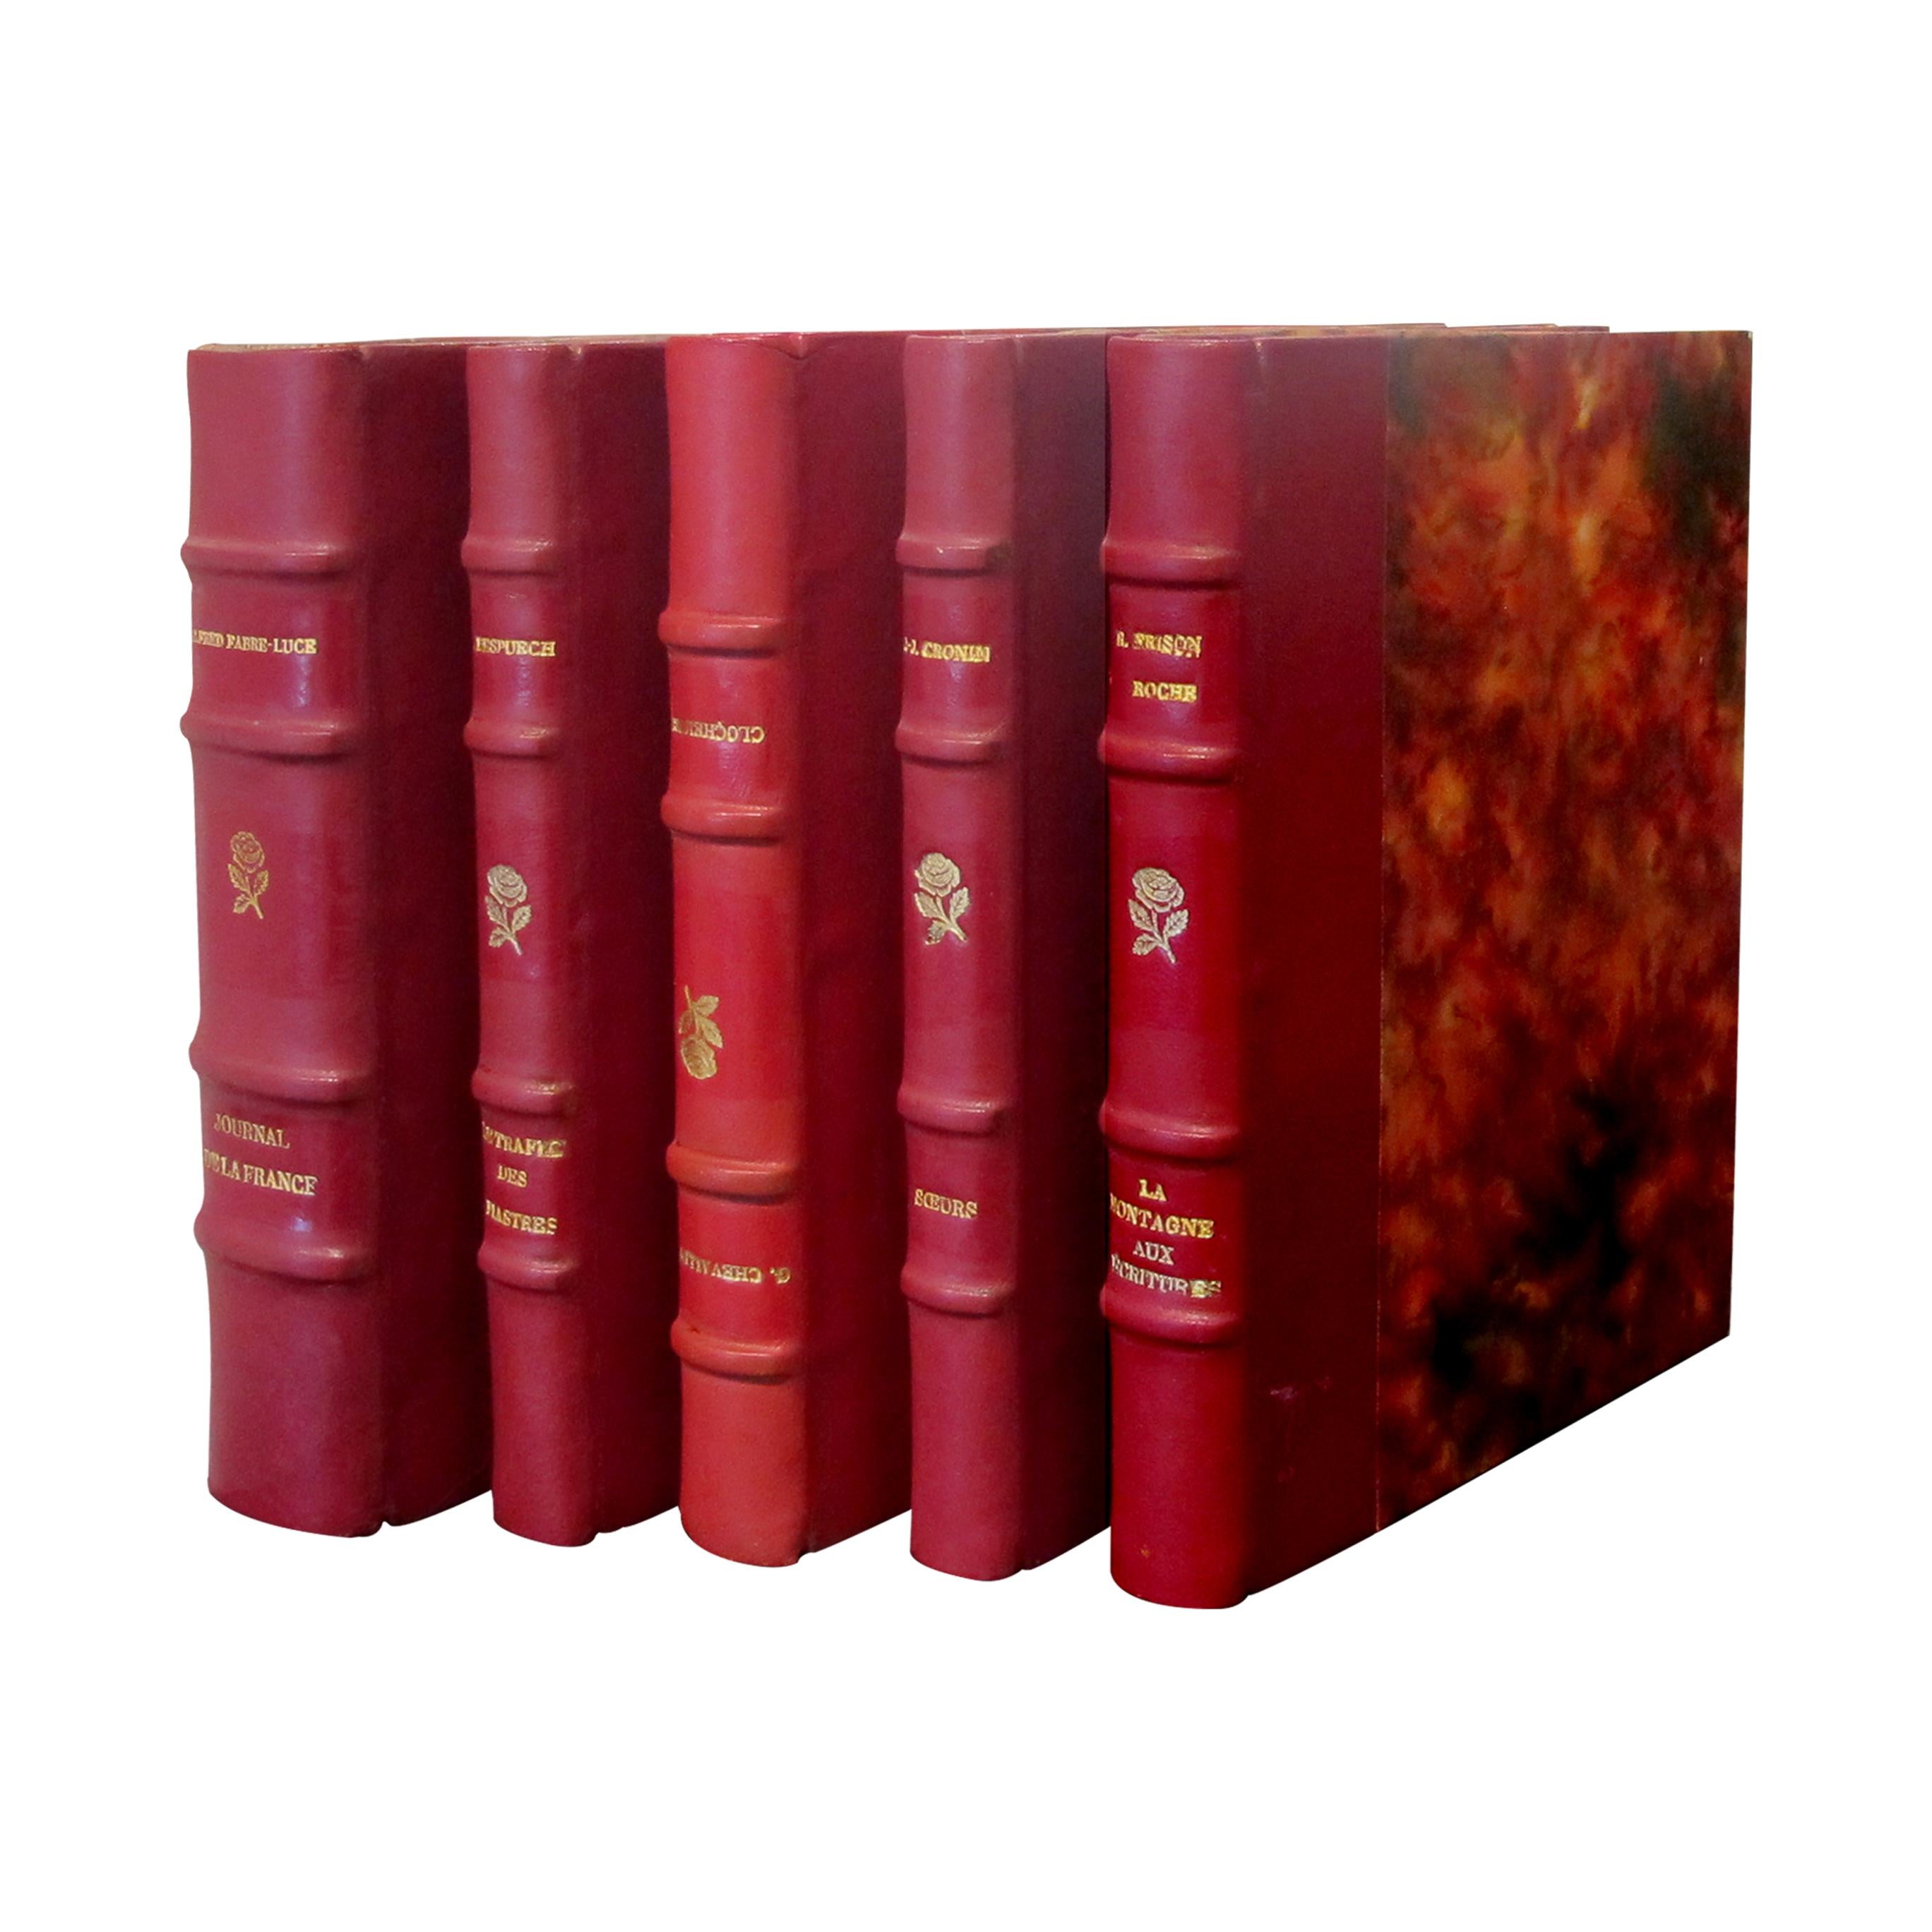 A beautiful set of 19, highly-decorative, French red leather-bound books which were printed in small editions with the dates ranging from the 1920s to the 1960s. The books are written by various authors and printed by a number of different